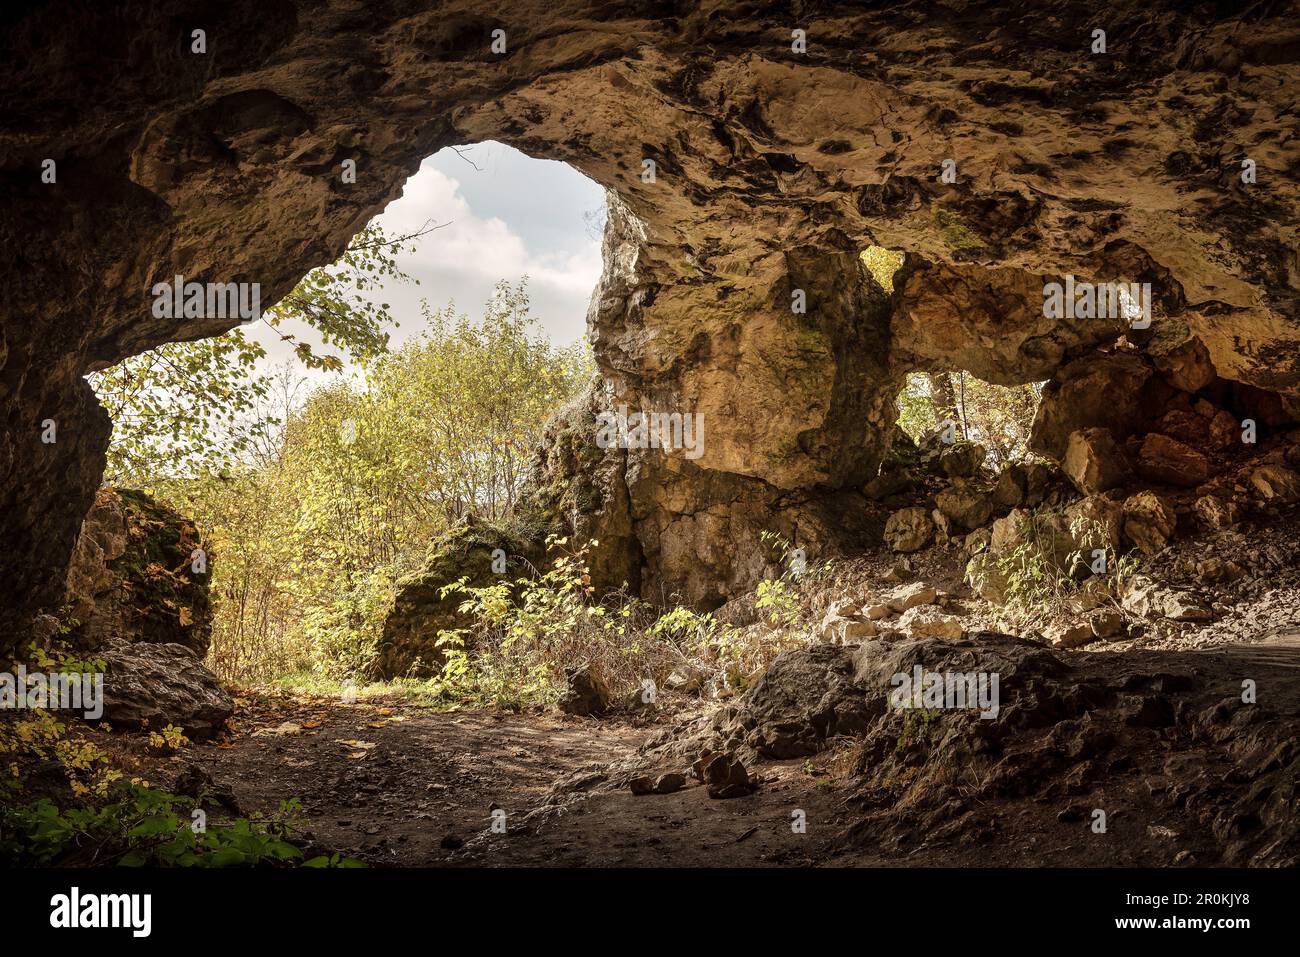 UNESCO World Heritage Ice Age Caves of the Swabian Alb, Bockstein Cave, Baden-Wuerttemberg, Germany Stock Photo